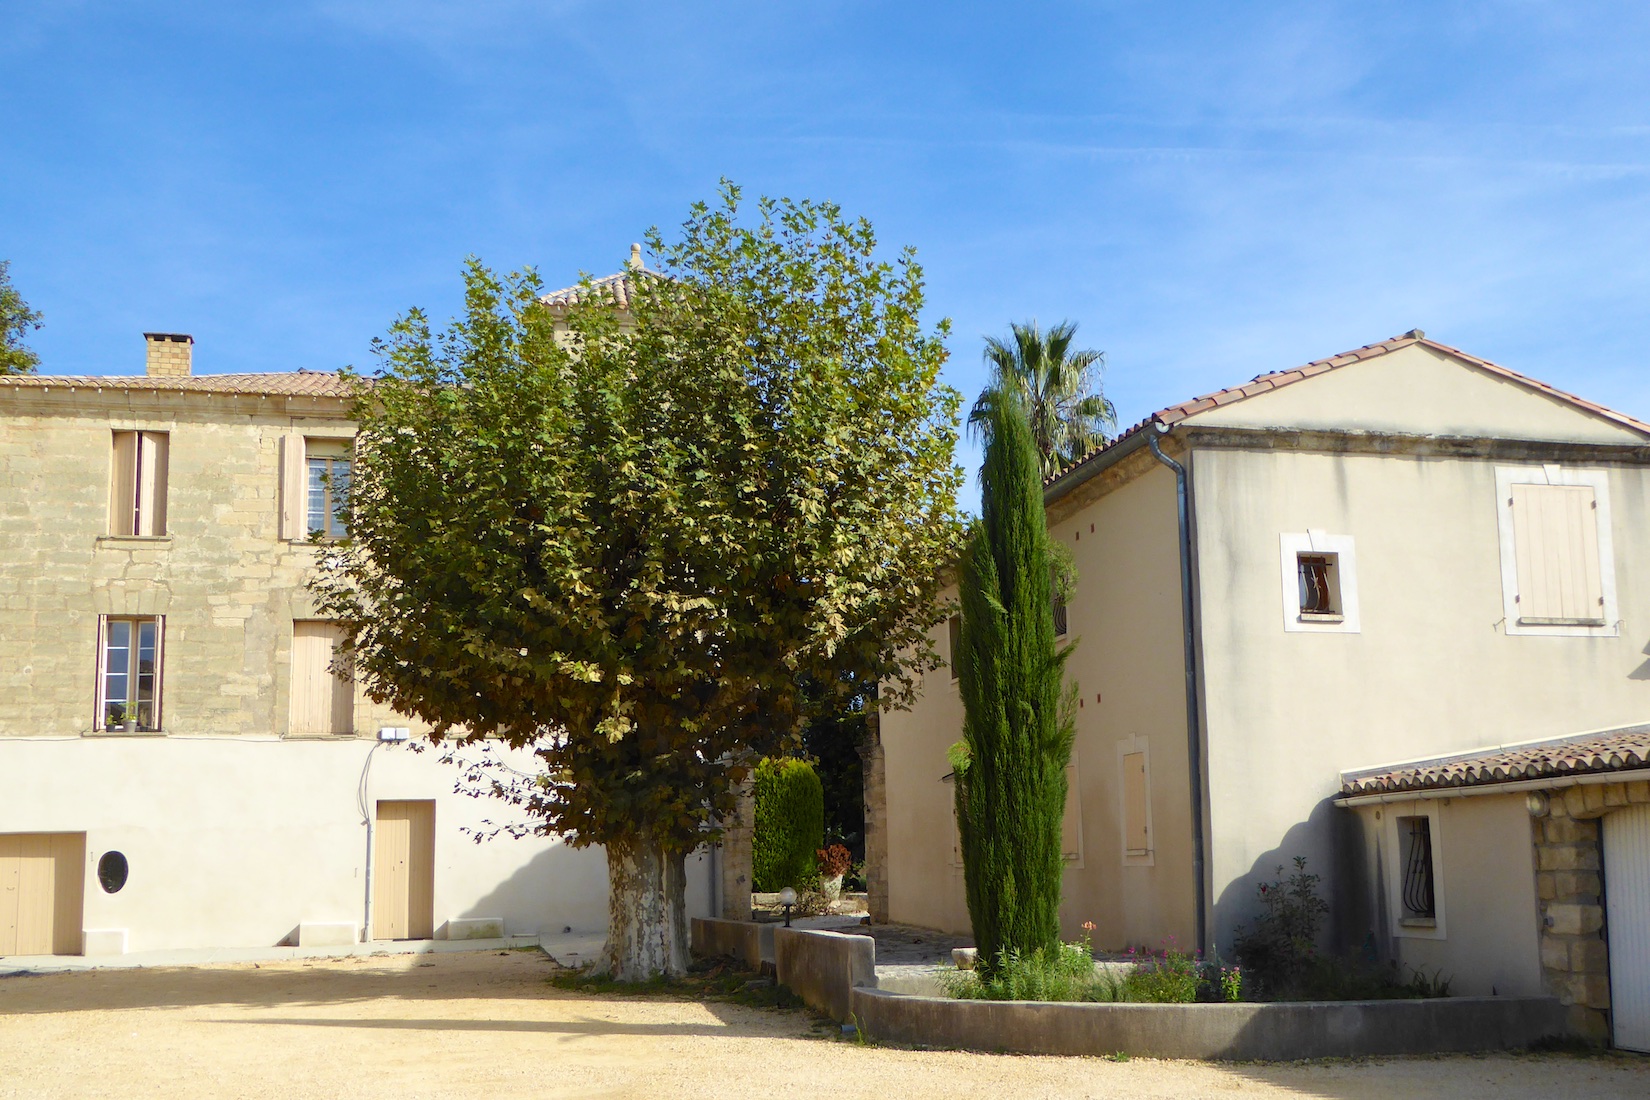 Château des Fouzes, Uzes, France, home to the polish cyrptologists who first cracked the Enigma Code before World War II